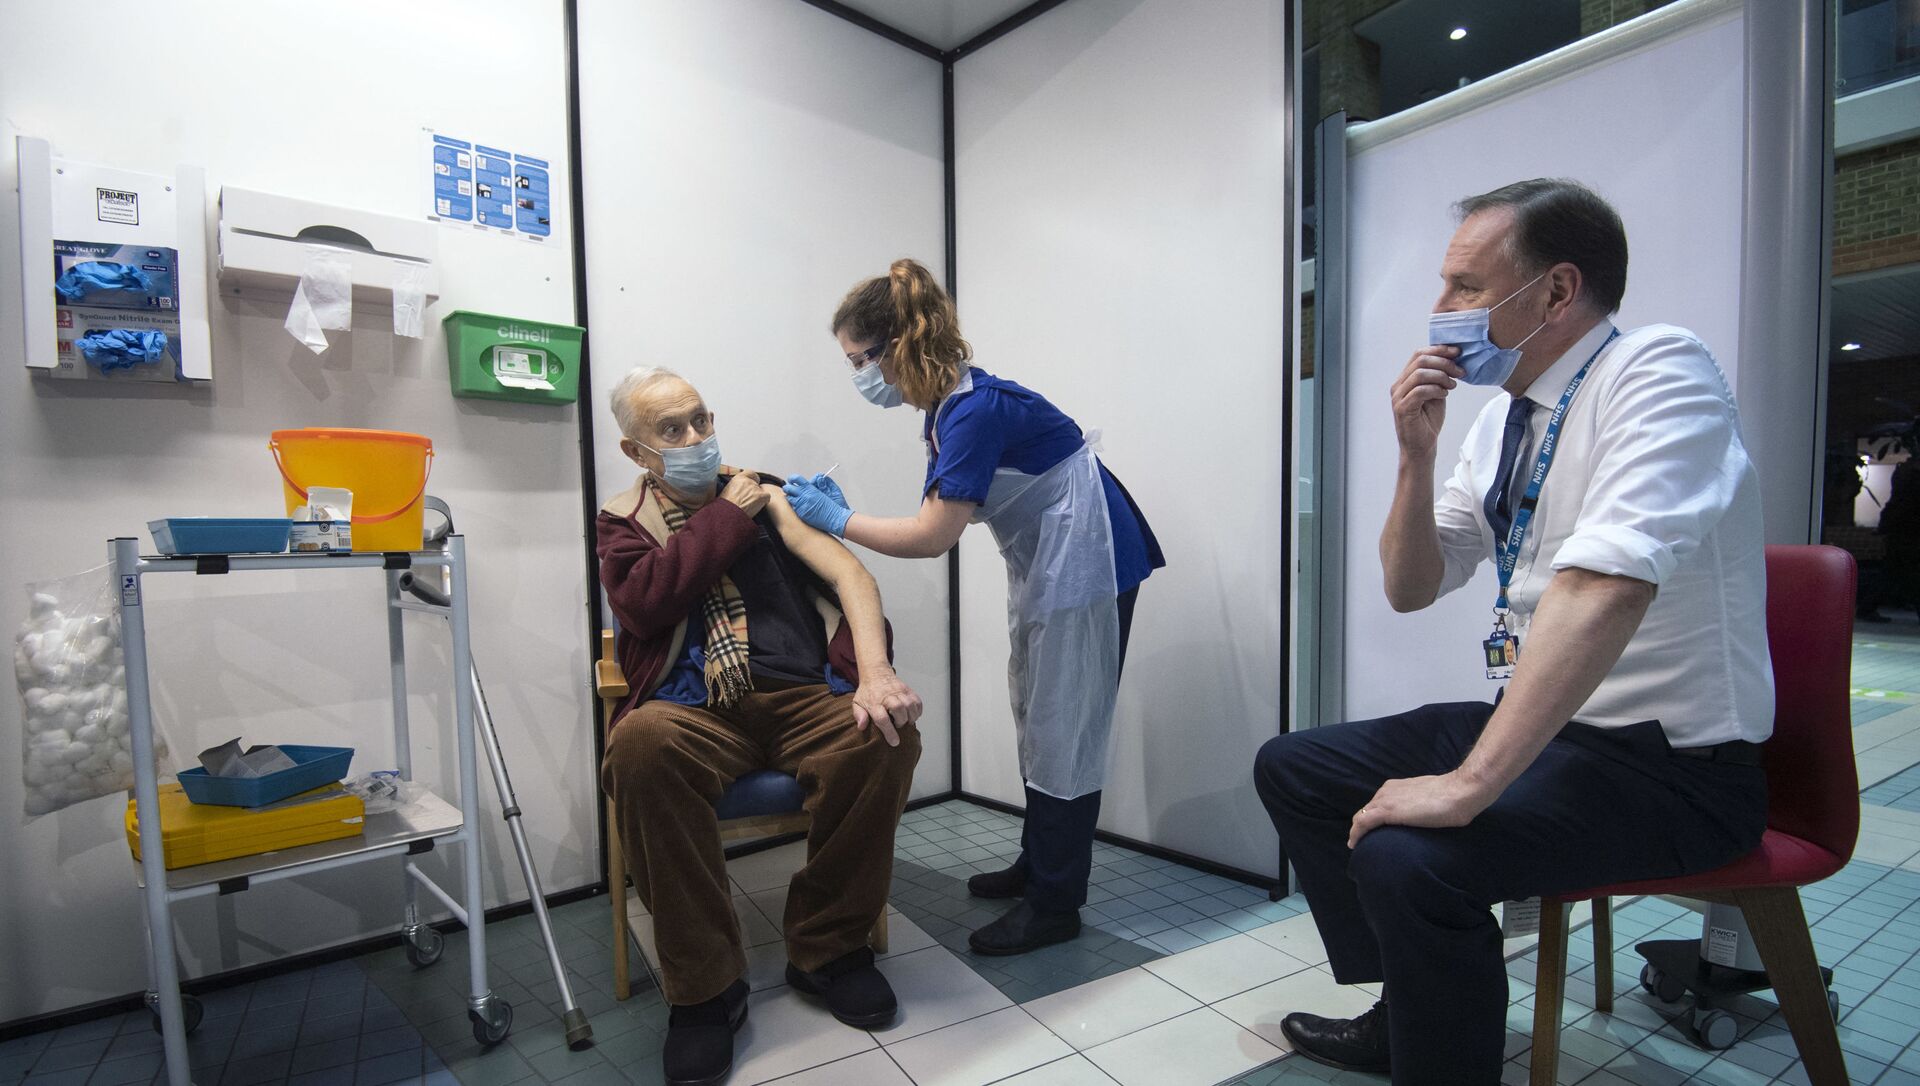 Simon Stevens (R), Chief Executive of the NHS, watches as a nurse (C) administers a dose of the Pfizer-BioNTech Covid-19 vaccine to Frank Naderer (L), 82, at Guy's Hospital in London on December 8, 2020 as the UK starts its biggest ever vaccination programme. - Sputnik International, 1920, 17.02.2021